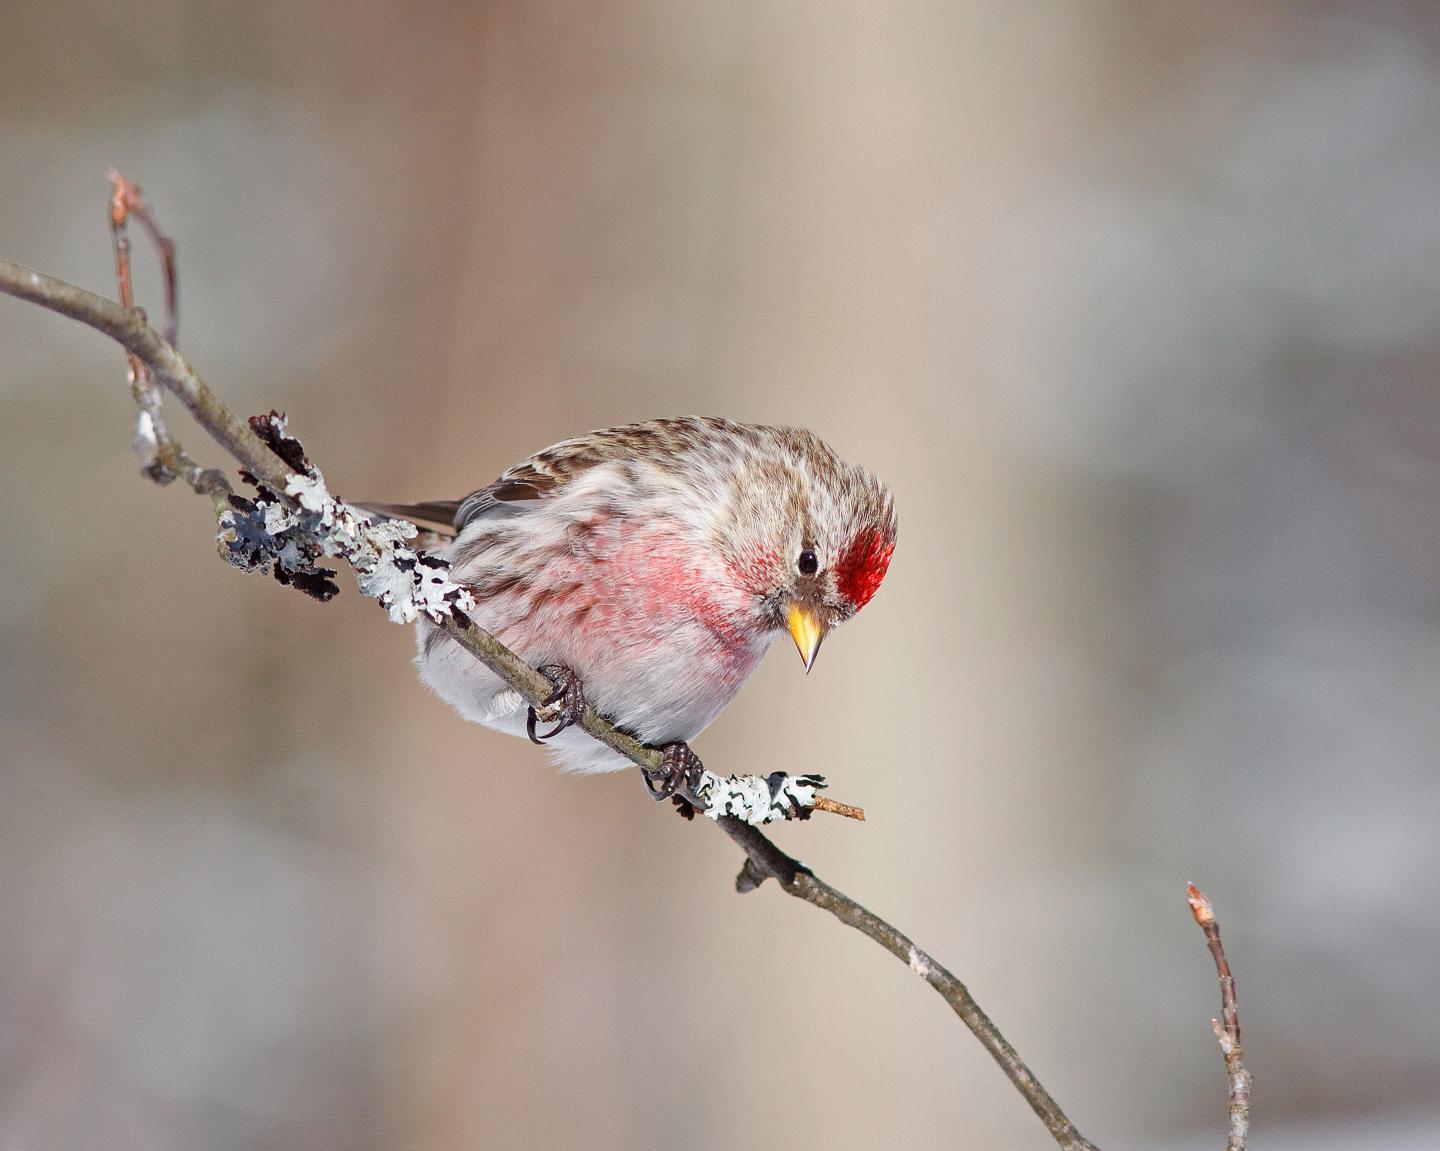 Migratory birds like this Common Redpoll consume both plants and seeds.